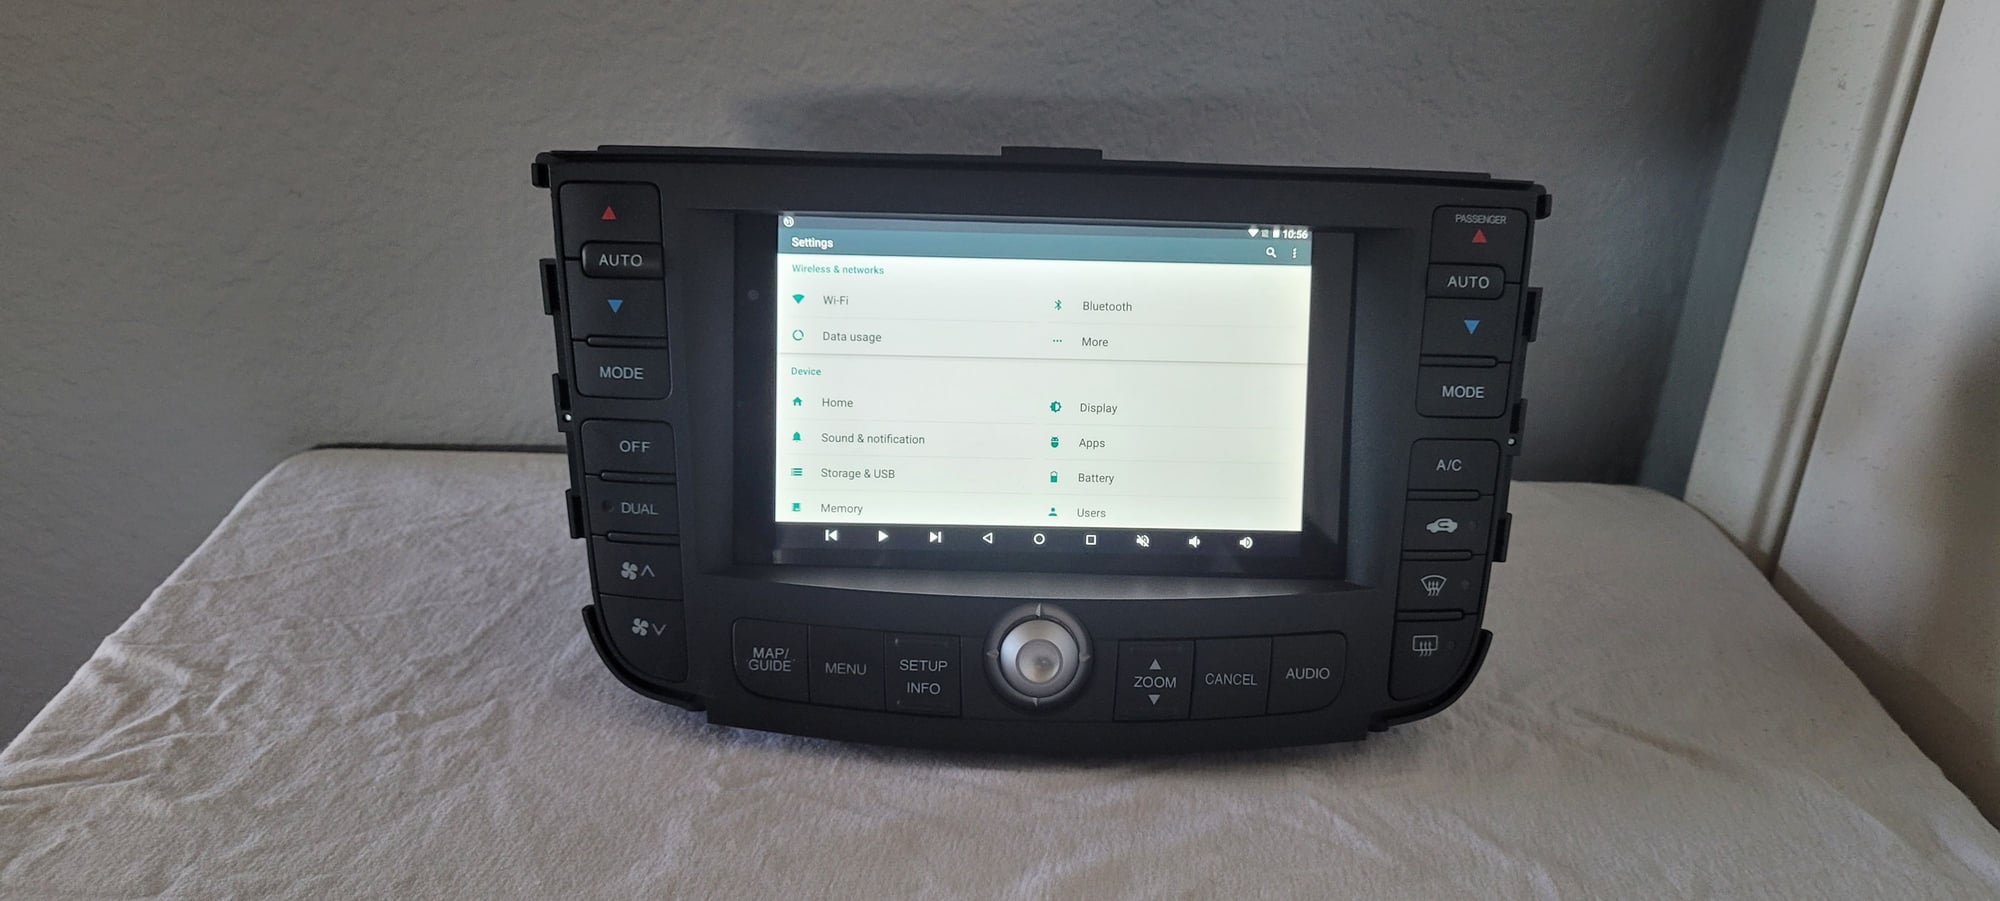 Audio Video/Electronics - FS: Nexus 7 tablet 3G TL - Used - 2004 to 2008 Acura TL - Norwalk, CA 90650, United States